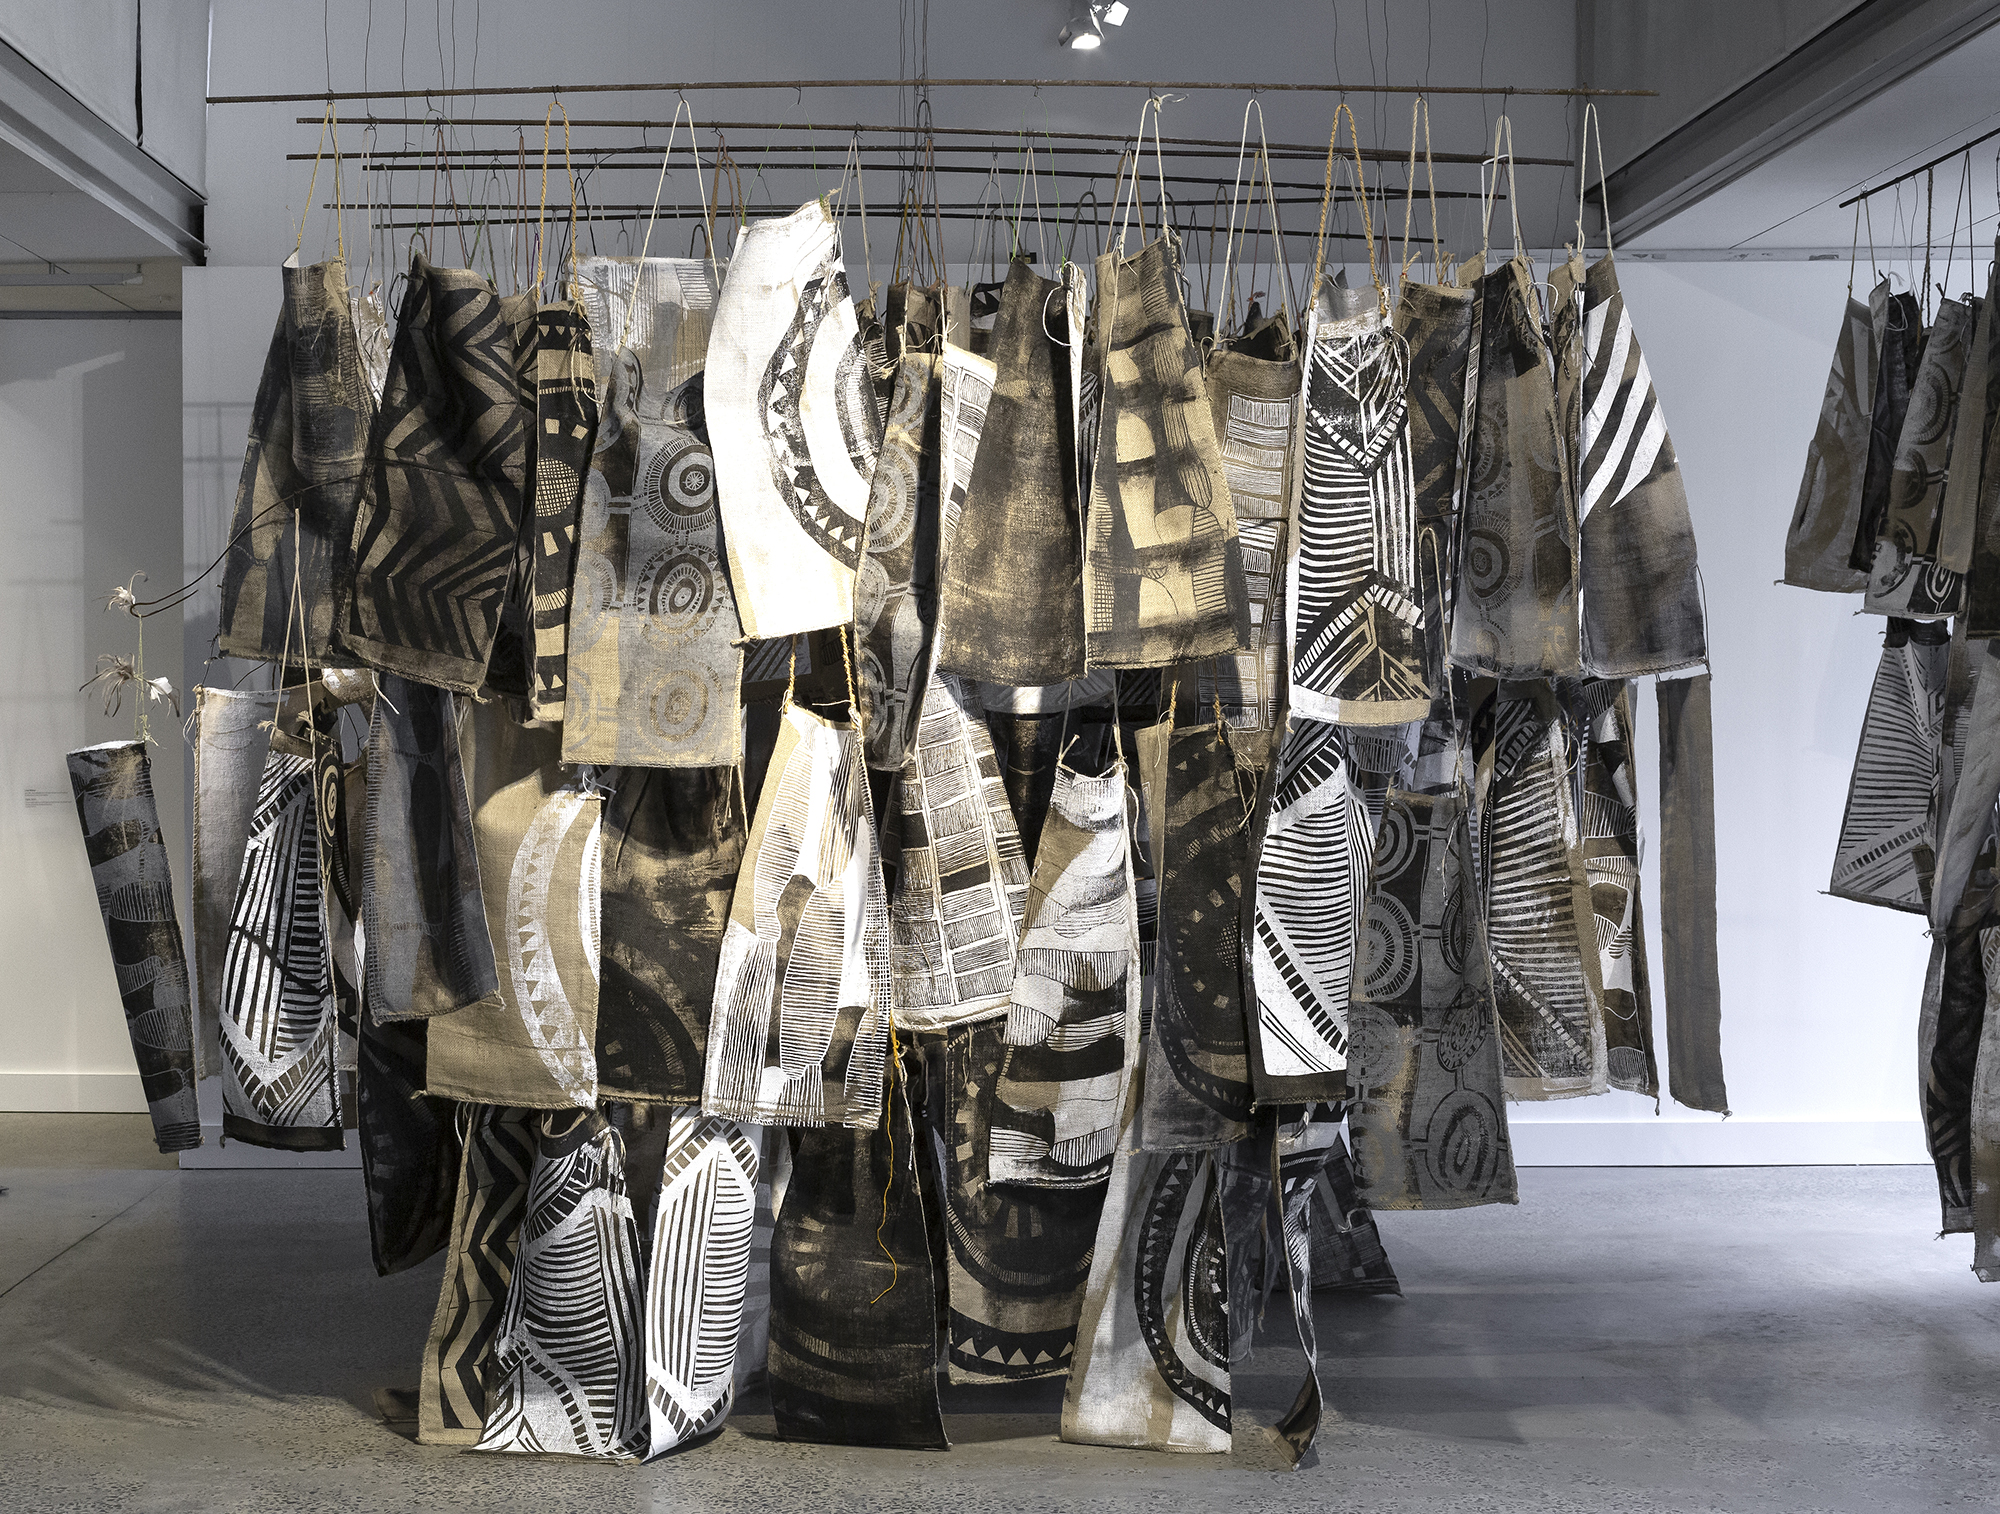 Dozens of pieces of hessian-coloured fabric printed with black-and-white geometric designs and suspended in a tight cluster in an art gallery.